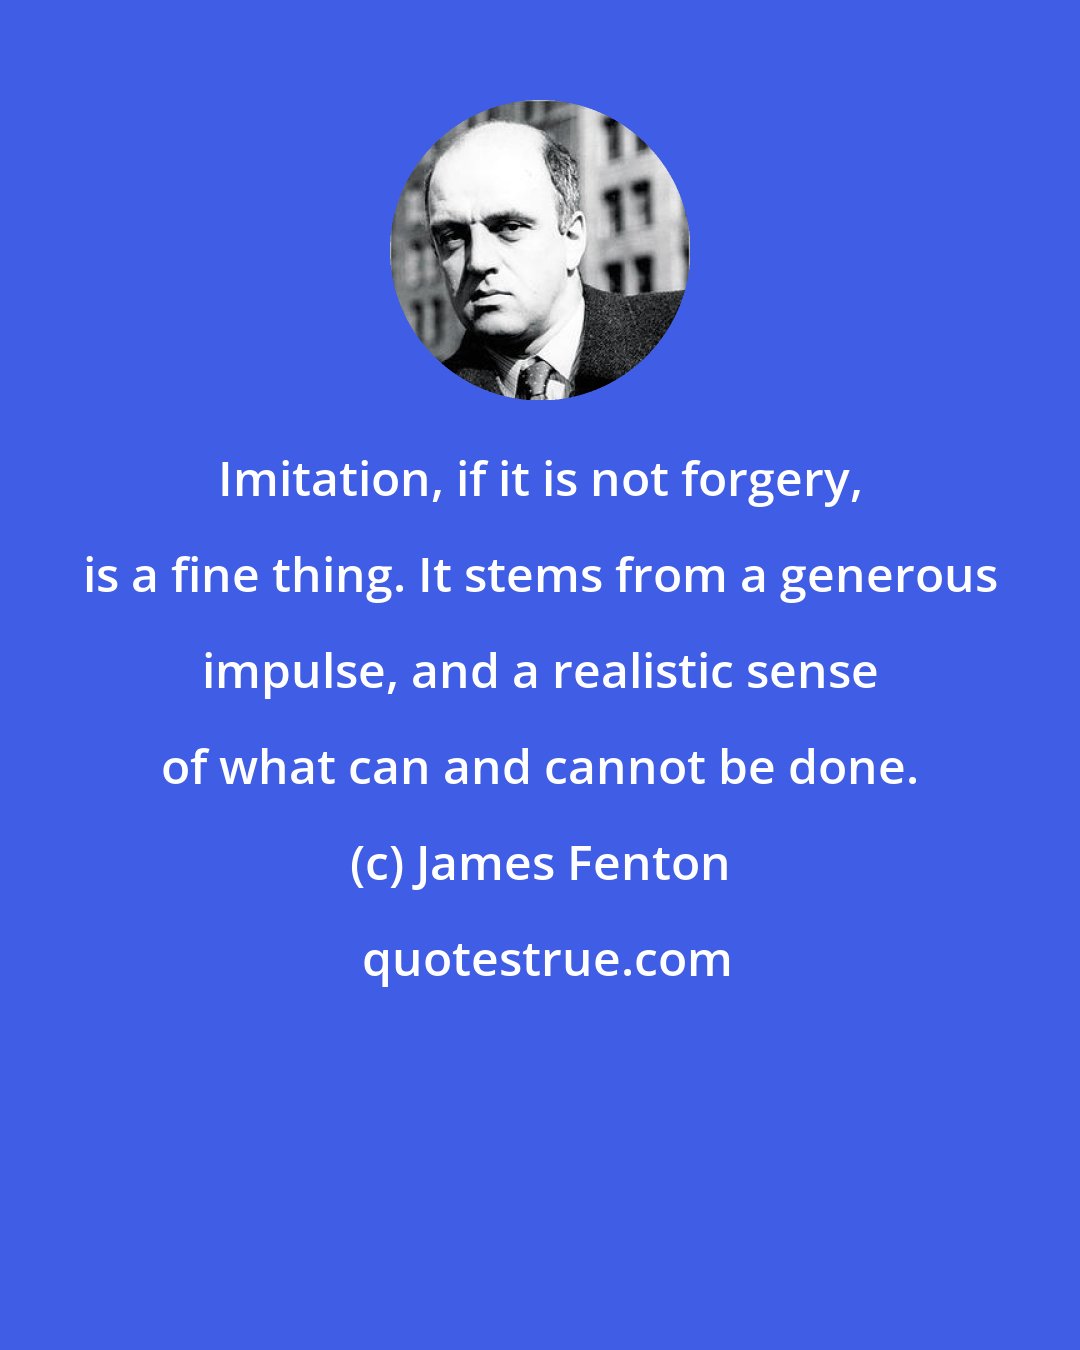 James Fenton: Imitation, if it is not forgery, is a fine thing. It stems from a generous impulse, and a realistic sense of what can and cannot be done.